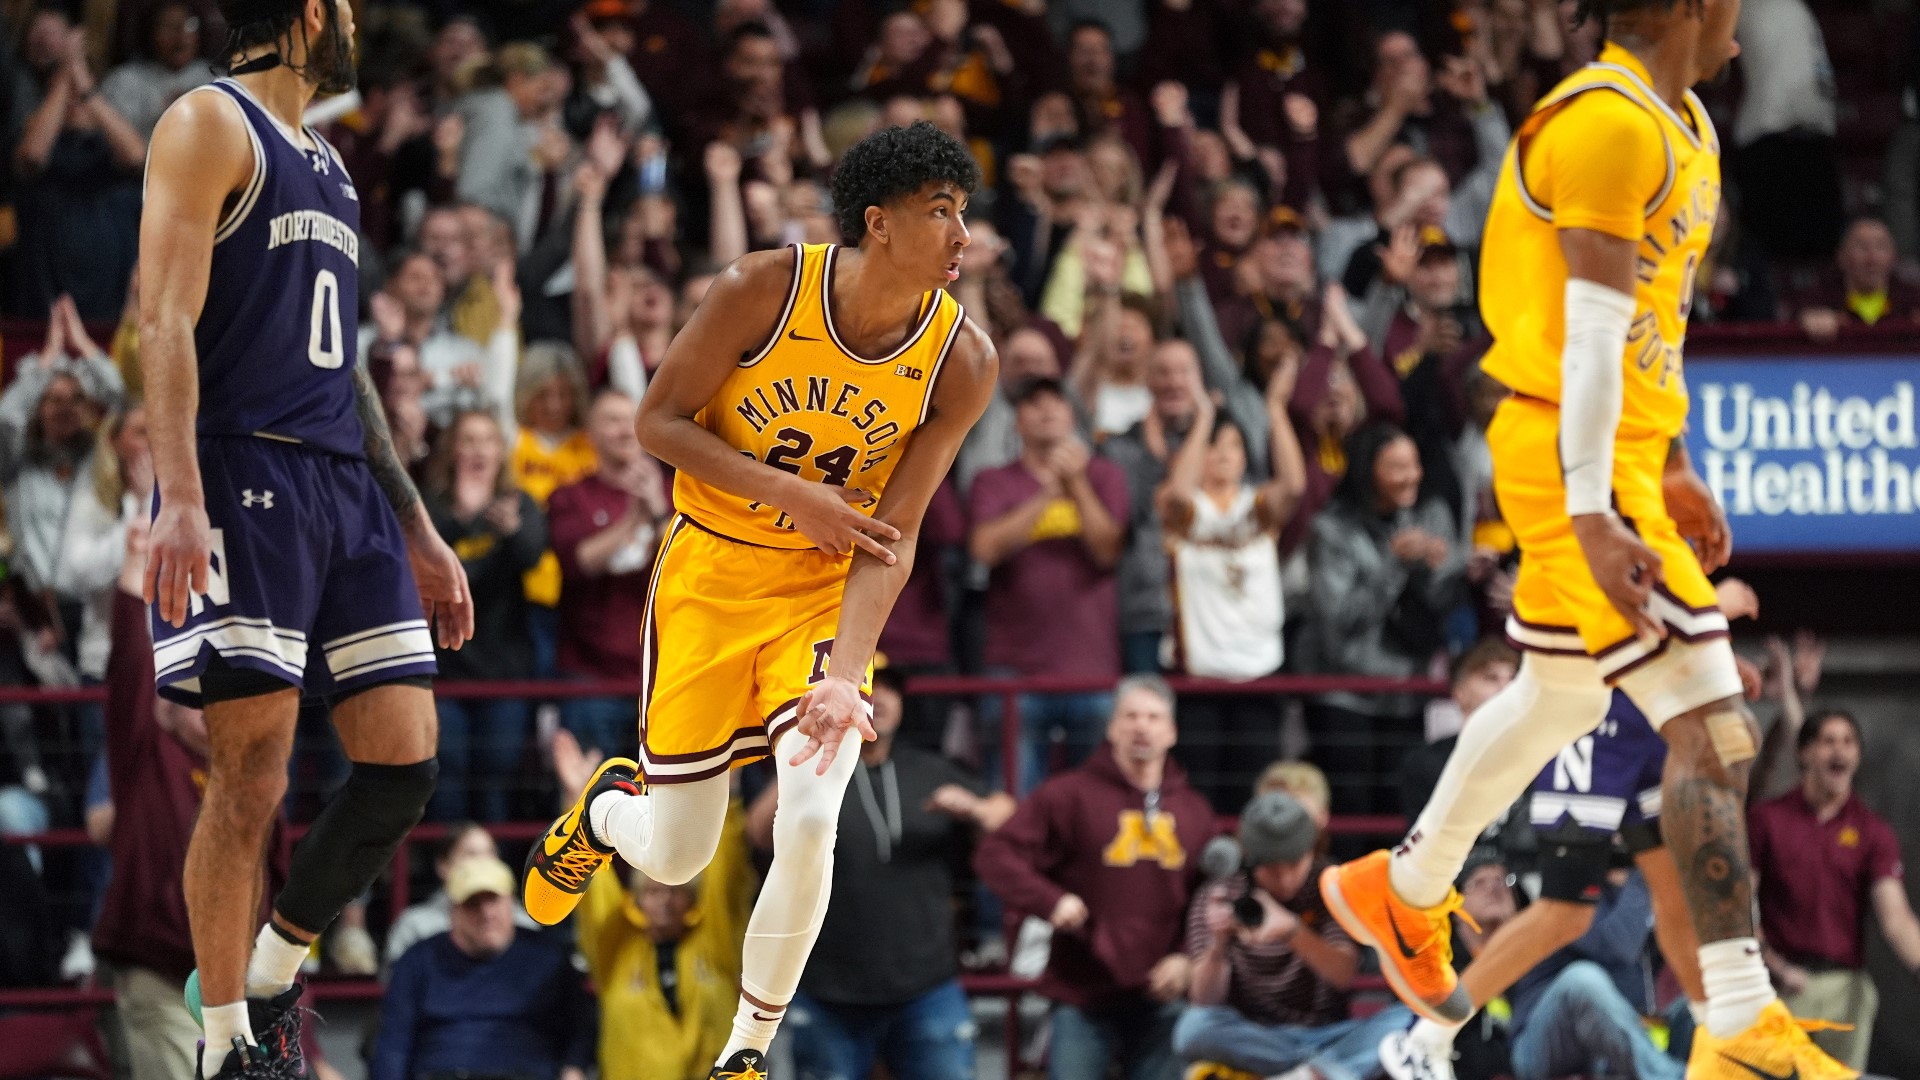 Minnesota missed its first 11 3-point attempts of the game, then knocked down 7 of 12 to fuel its comeback.